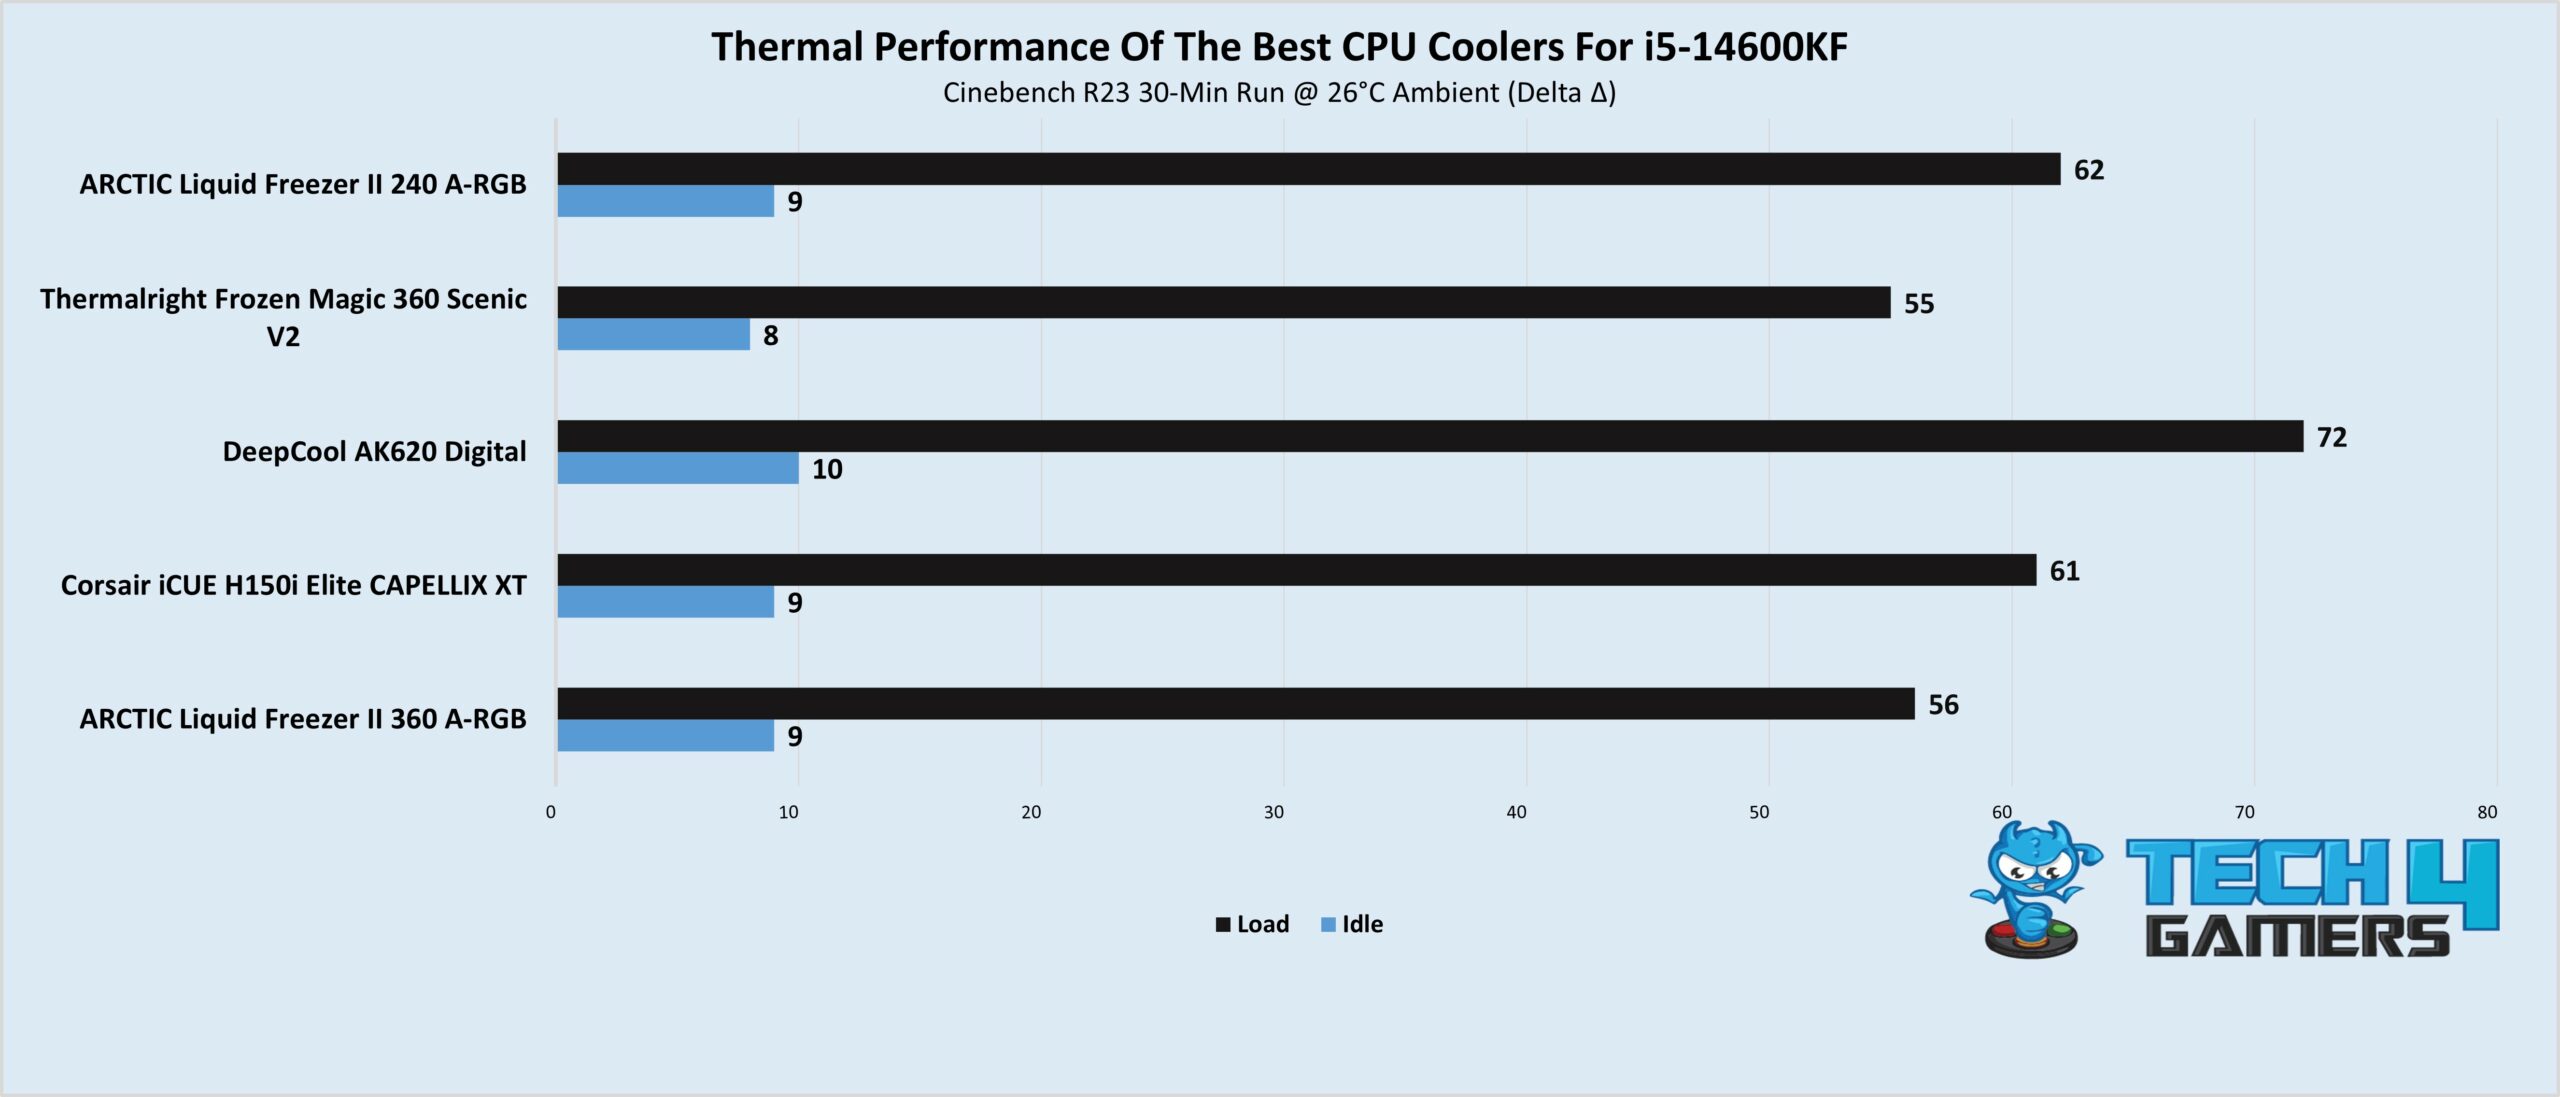 Thermal Performance Of The Best CPU Coolers For i5-14600KF